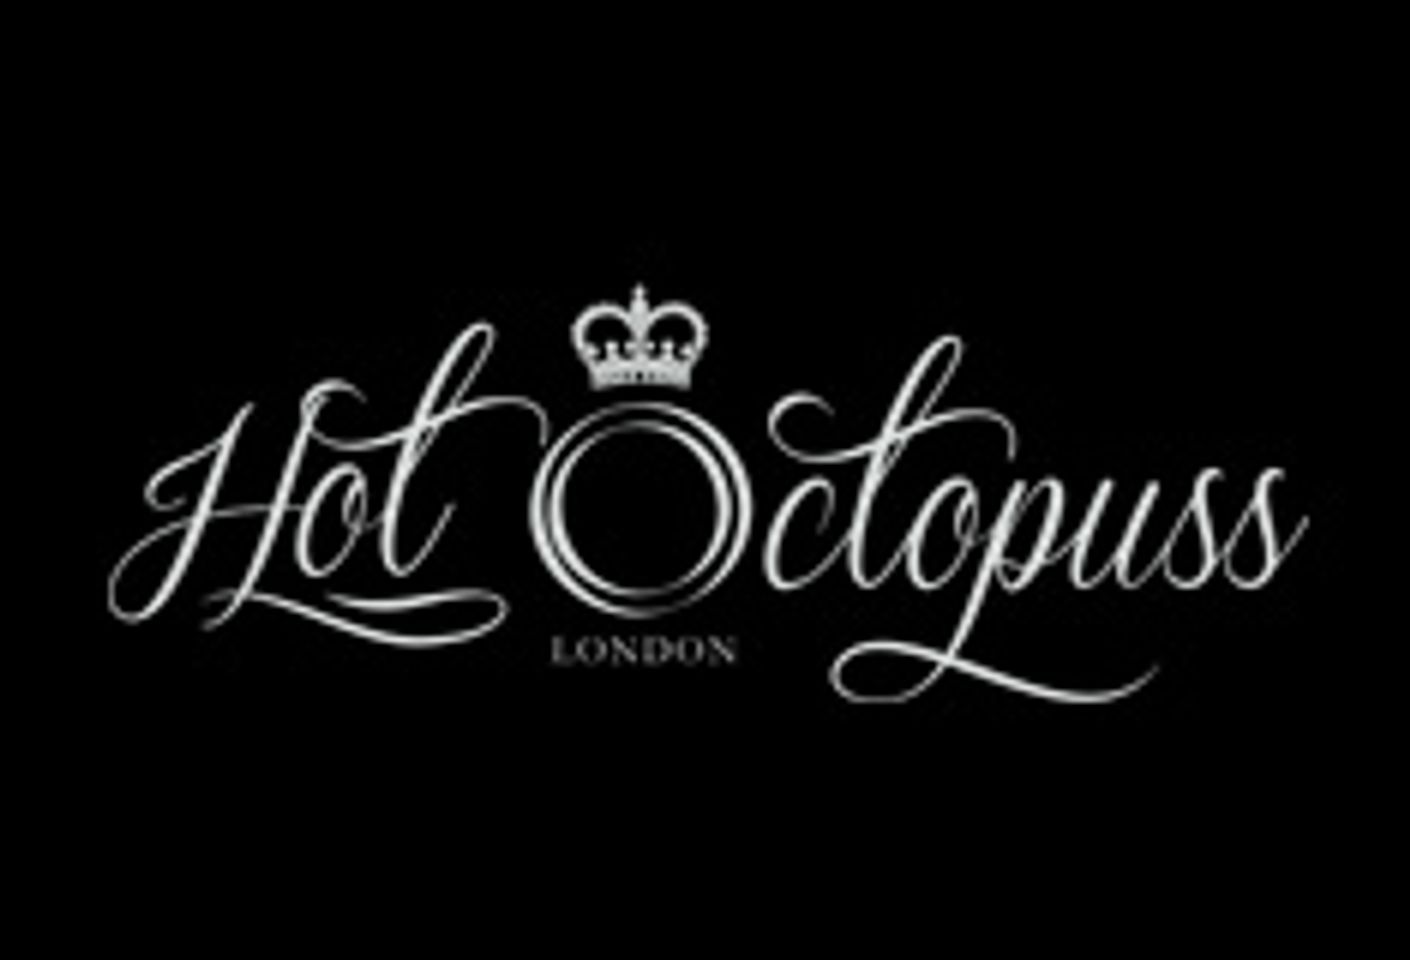 Hot Octopuss Traces History Of Masturbation In YouTube Video